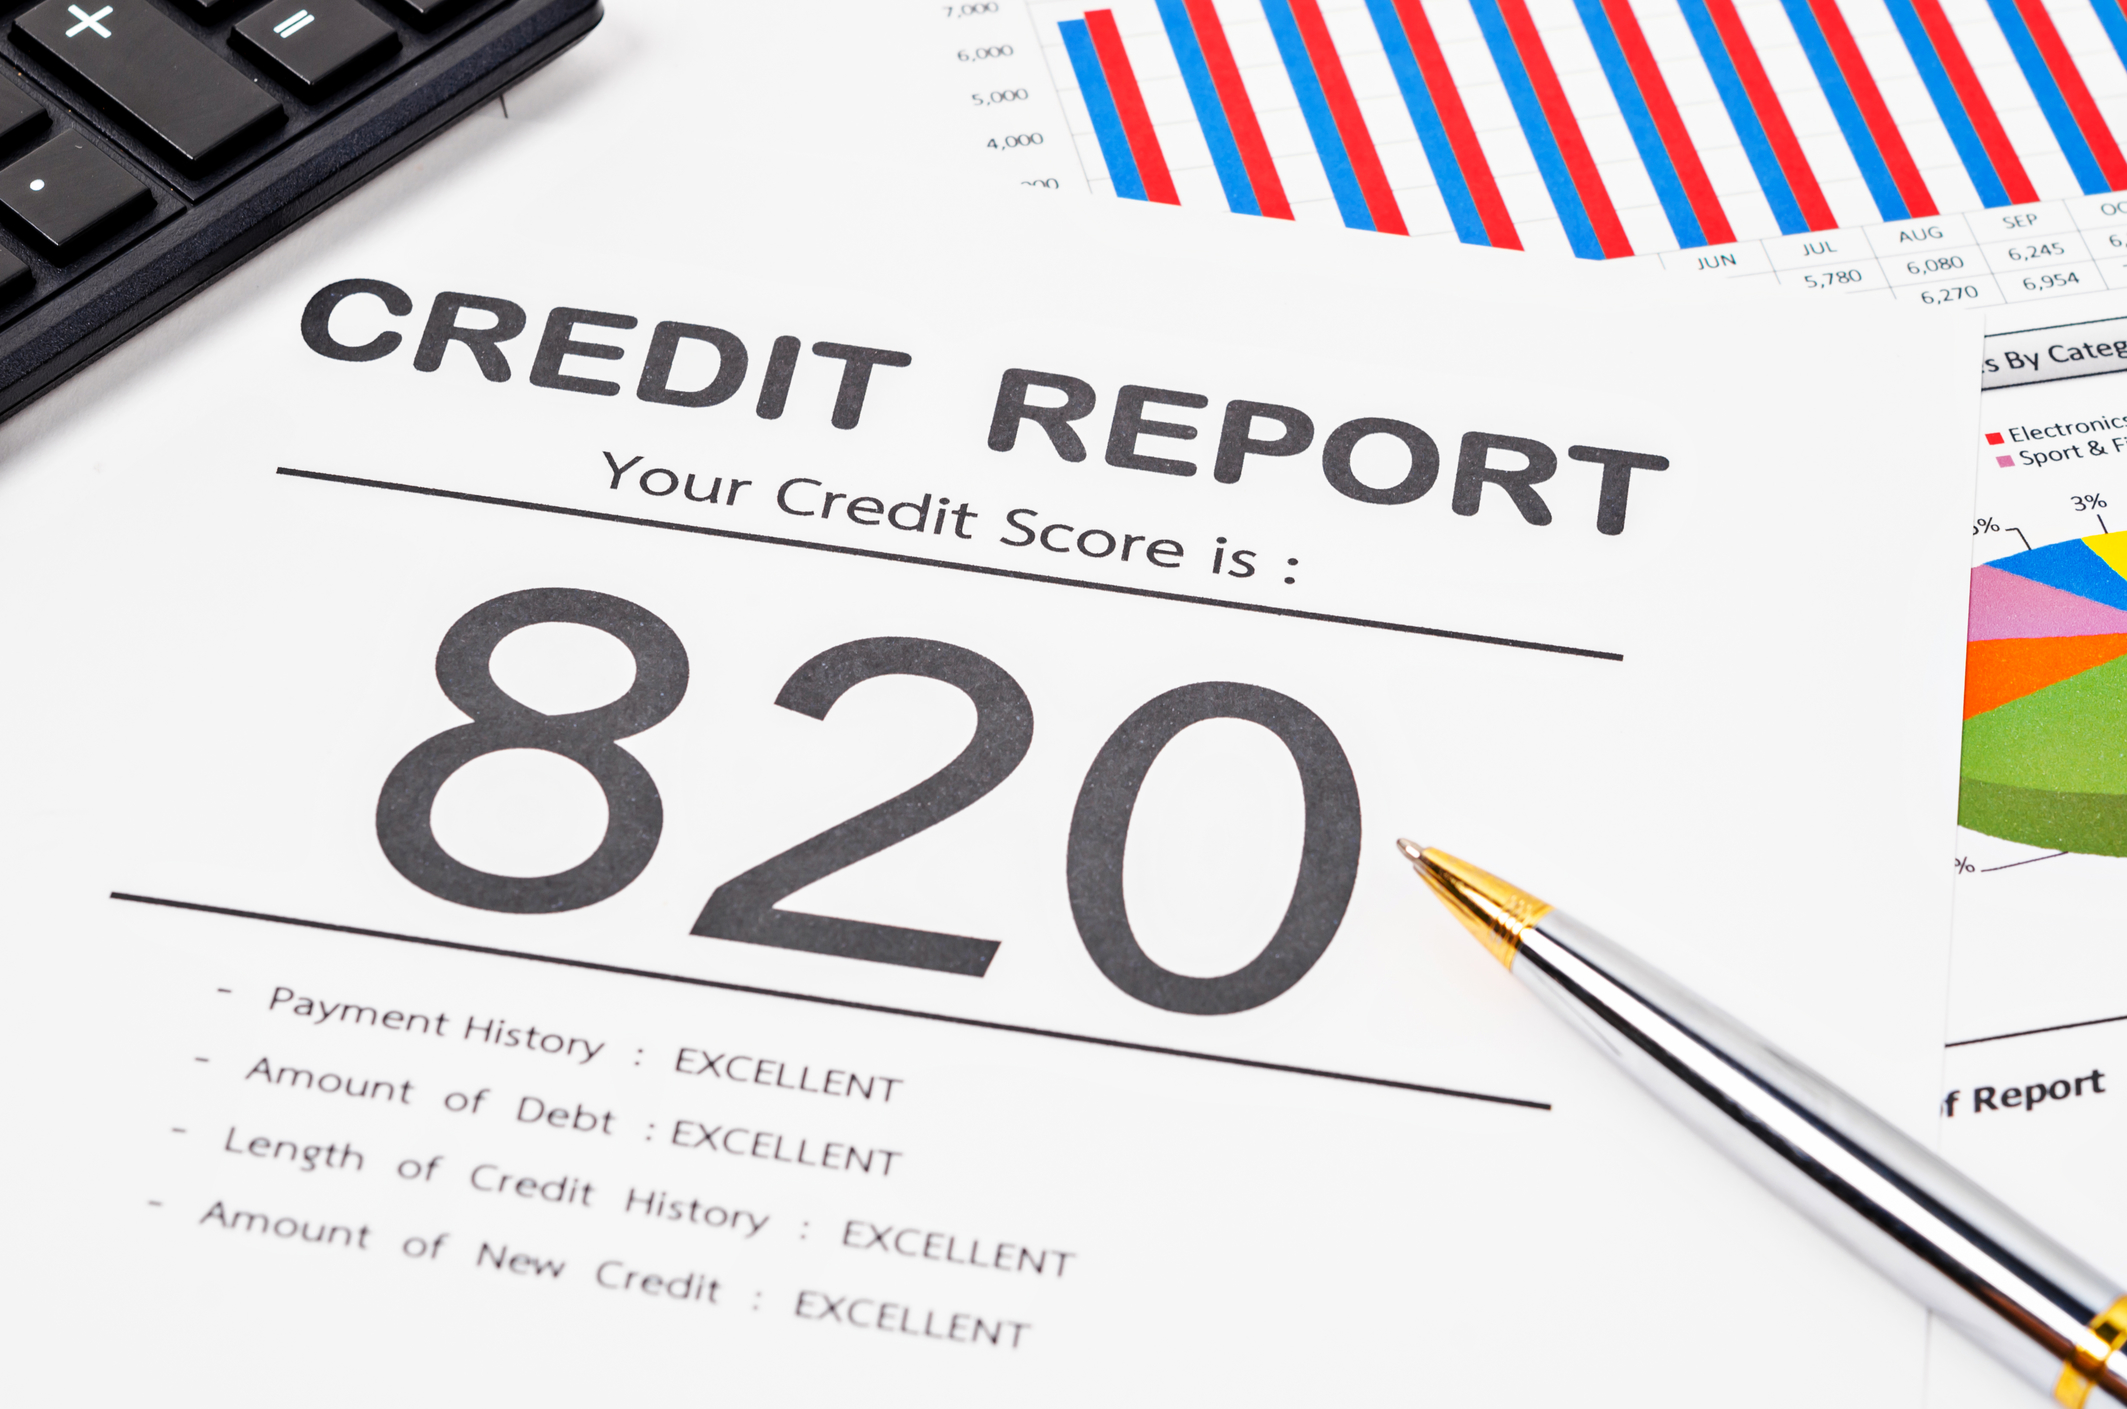 Three Simple Ways to Improve Your Credit Score